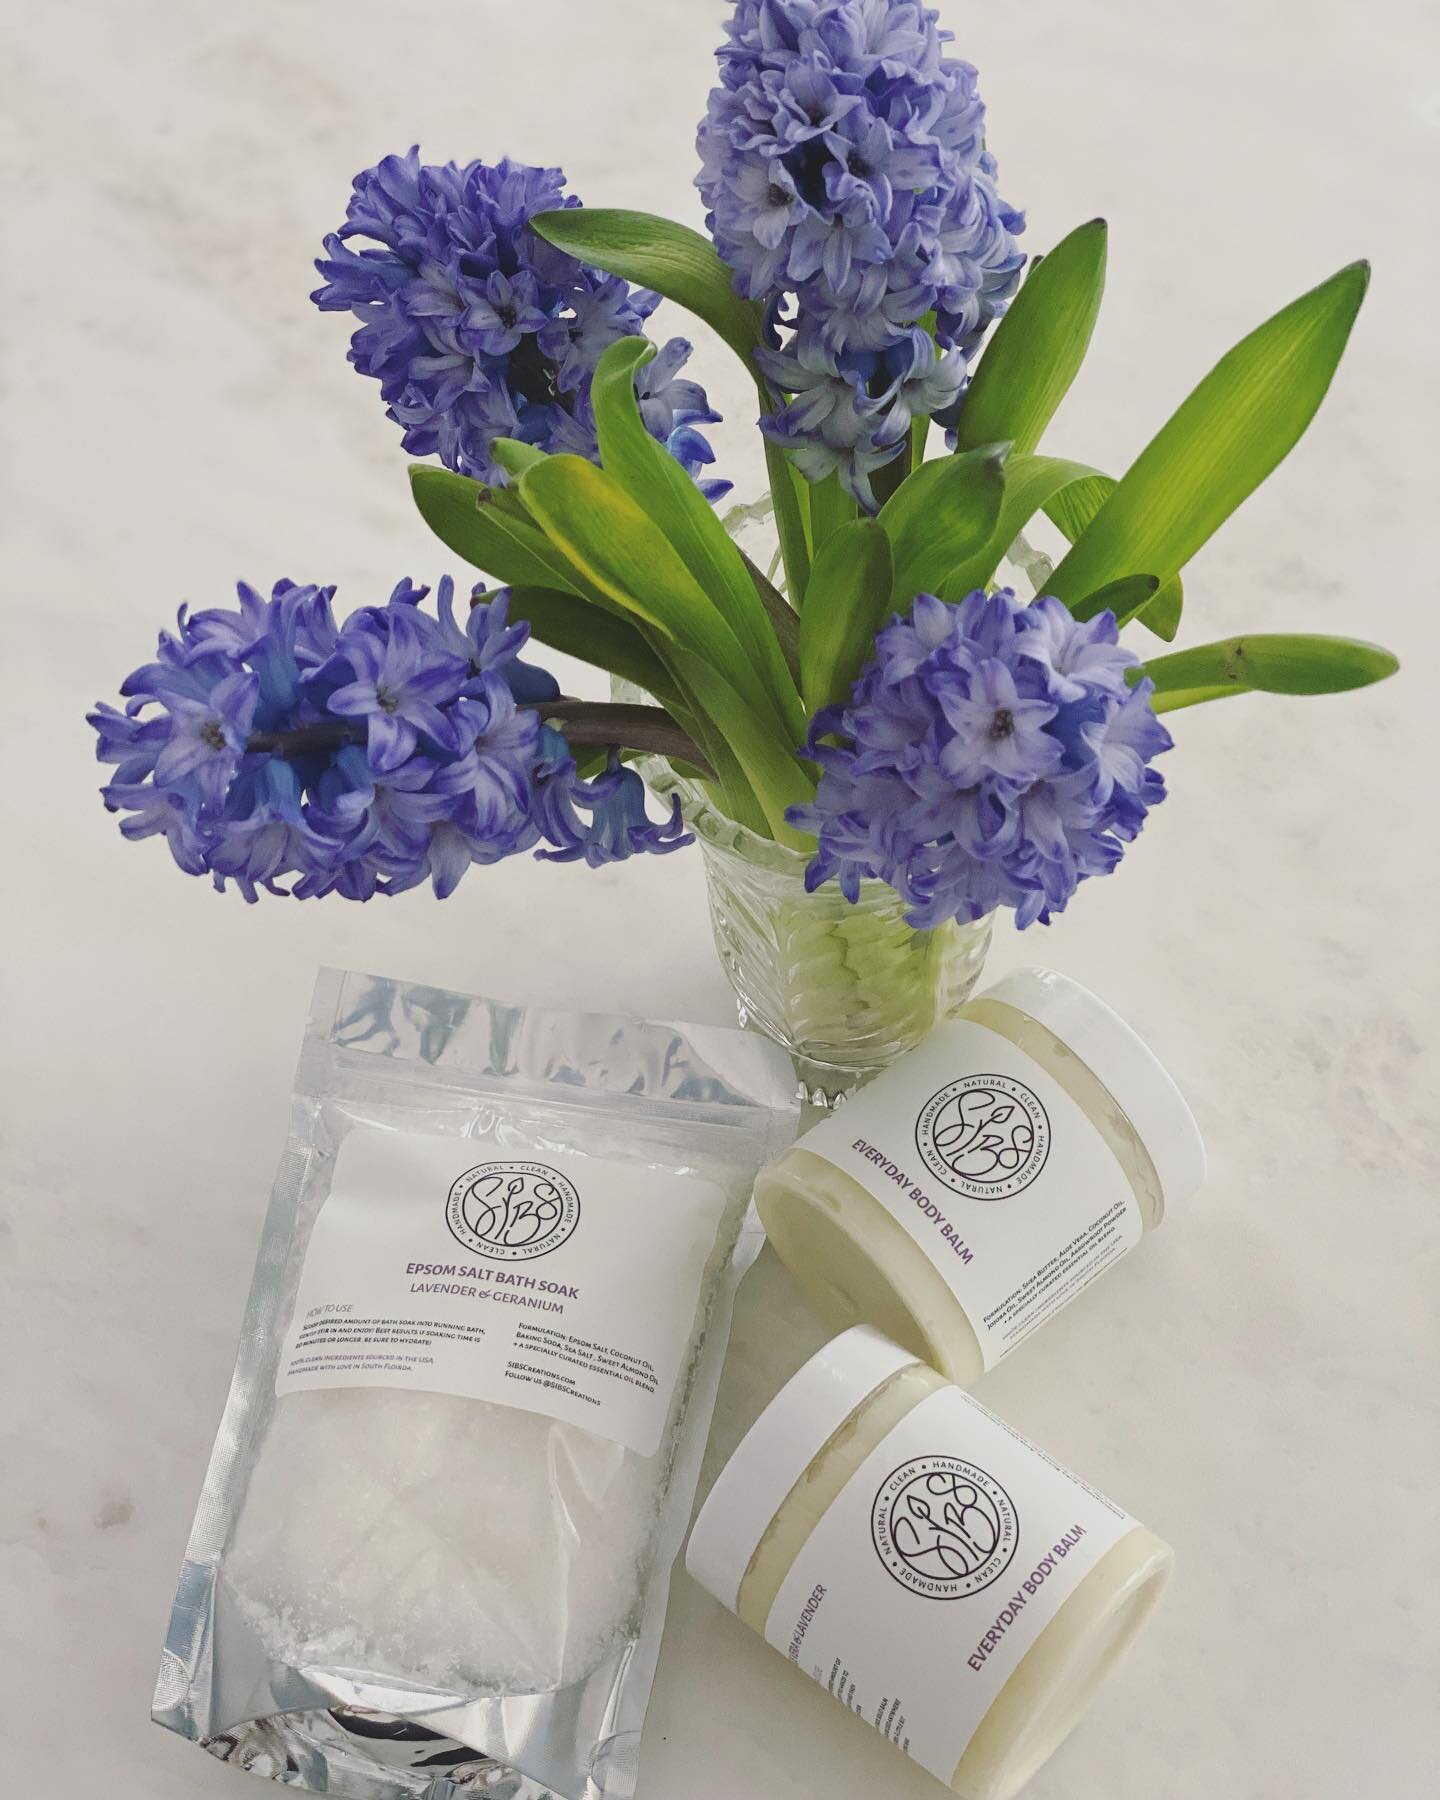 Spring is in full bloom &amp; we adore these blue hyacinth beauties. What&rsquo;s your favorite floral scent?! 
Comment below 🌸💕

#sibs #sibscreations #springflowers #cleanbeauty #handmadebodycare #southflorida #womeninbusiness #supportlocal #bodyc